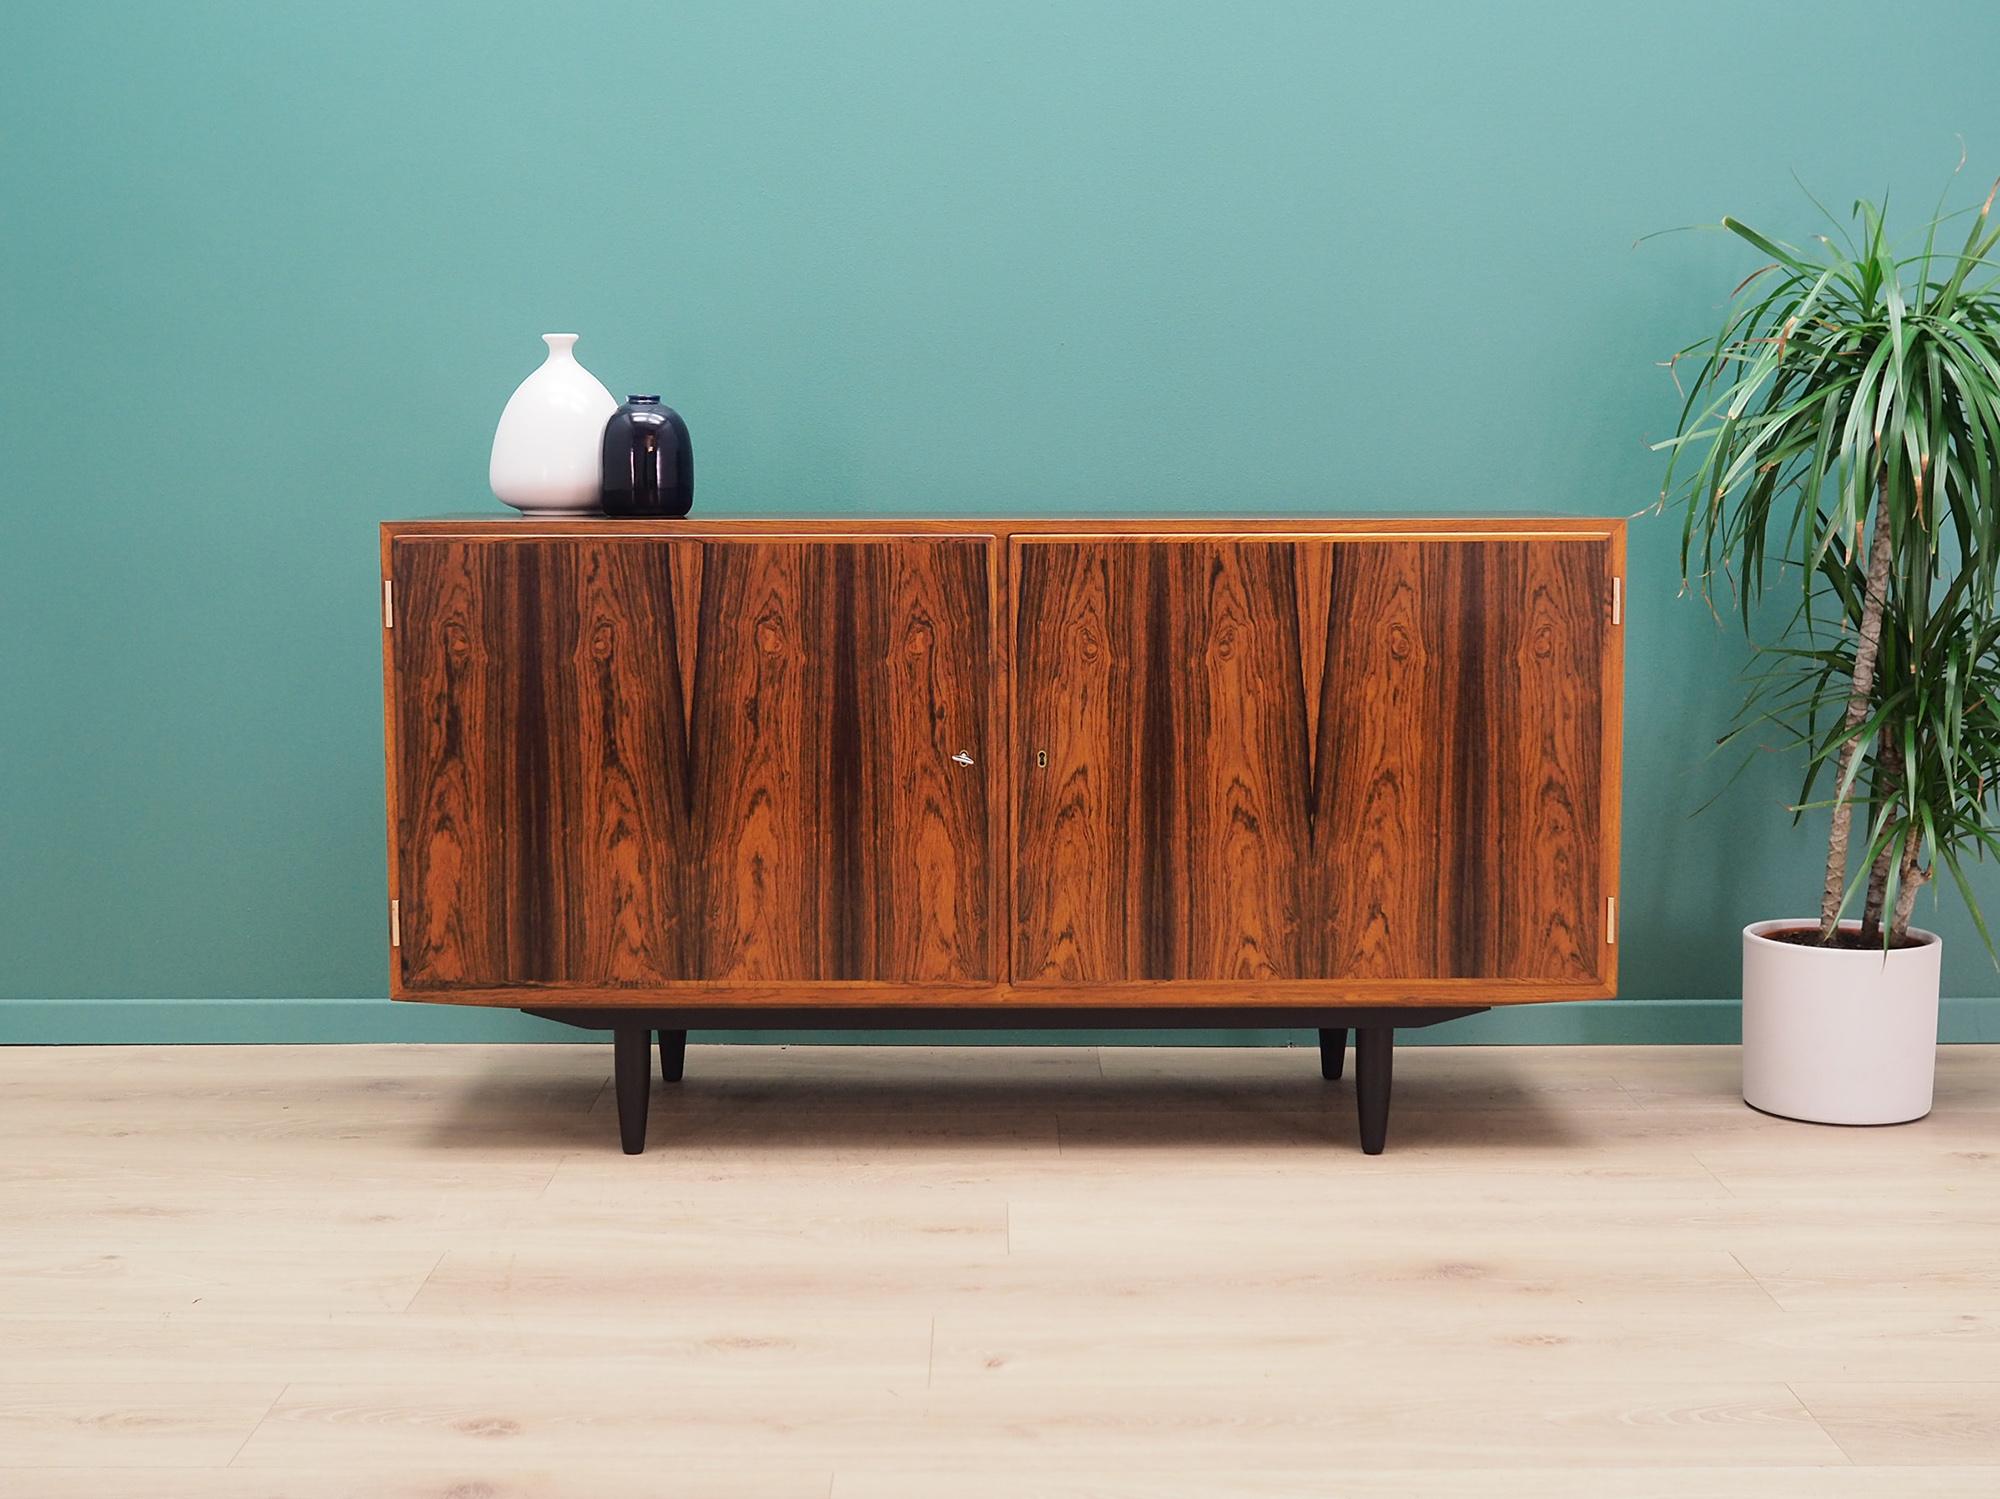 Brilliant cabinet from the 1960s-1970s. Minimalist form, Scandinavian design. The furniture is covered with rosewood veneer. Designed by Carlo Jensen, produced in the Hundevad & Co. manufactory. The cabinet has three stylish drawers and an